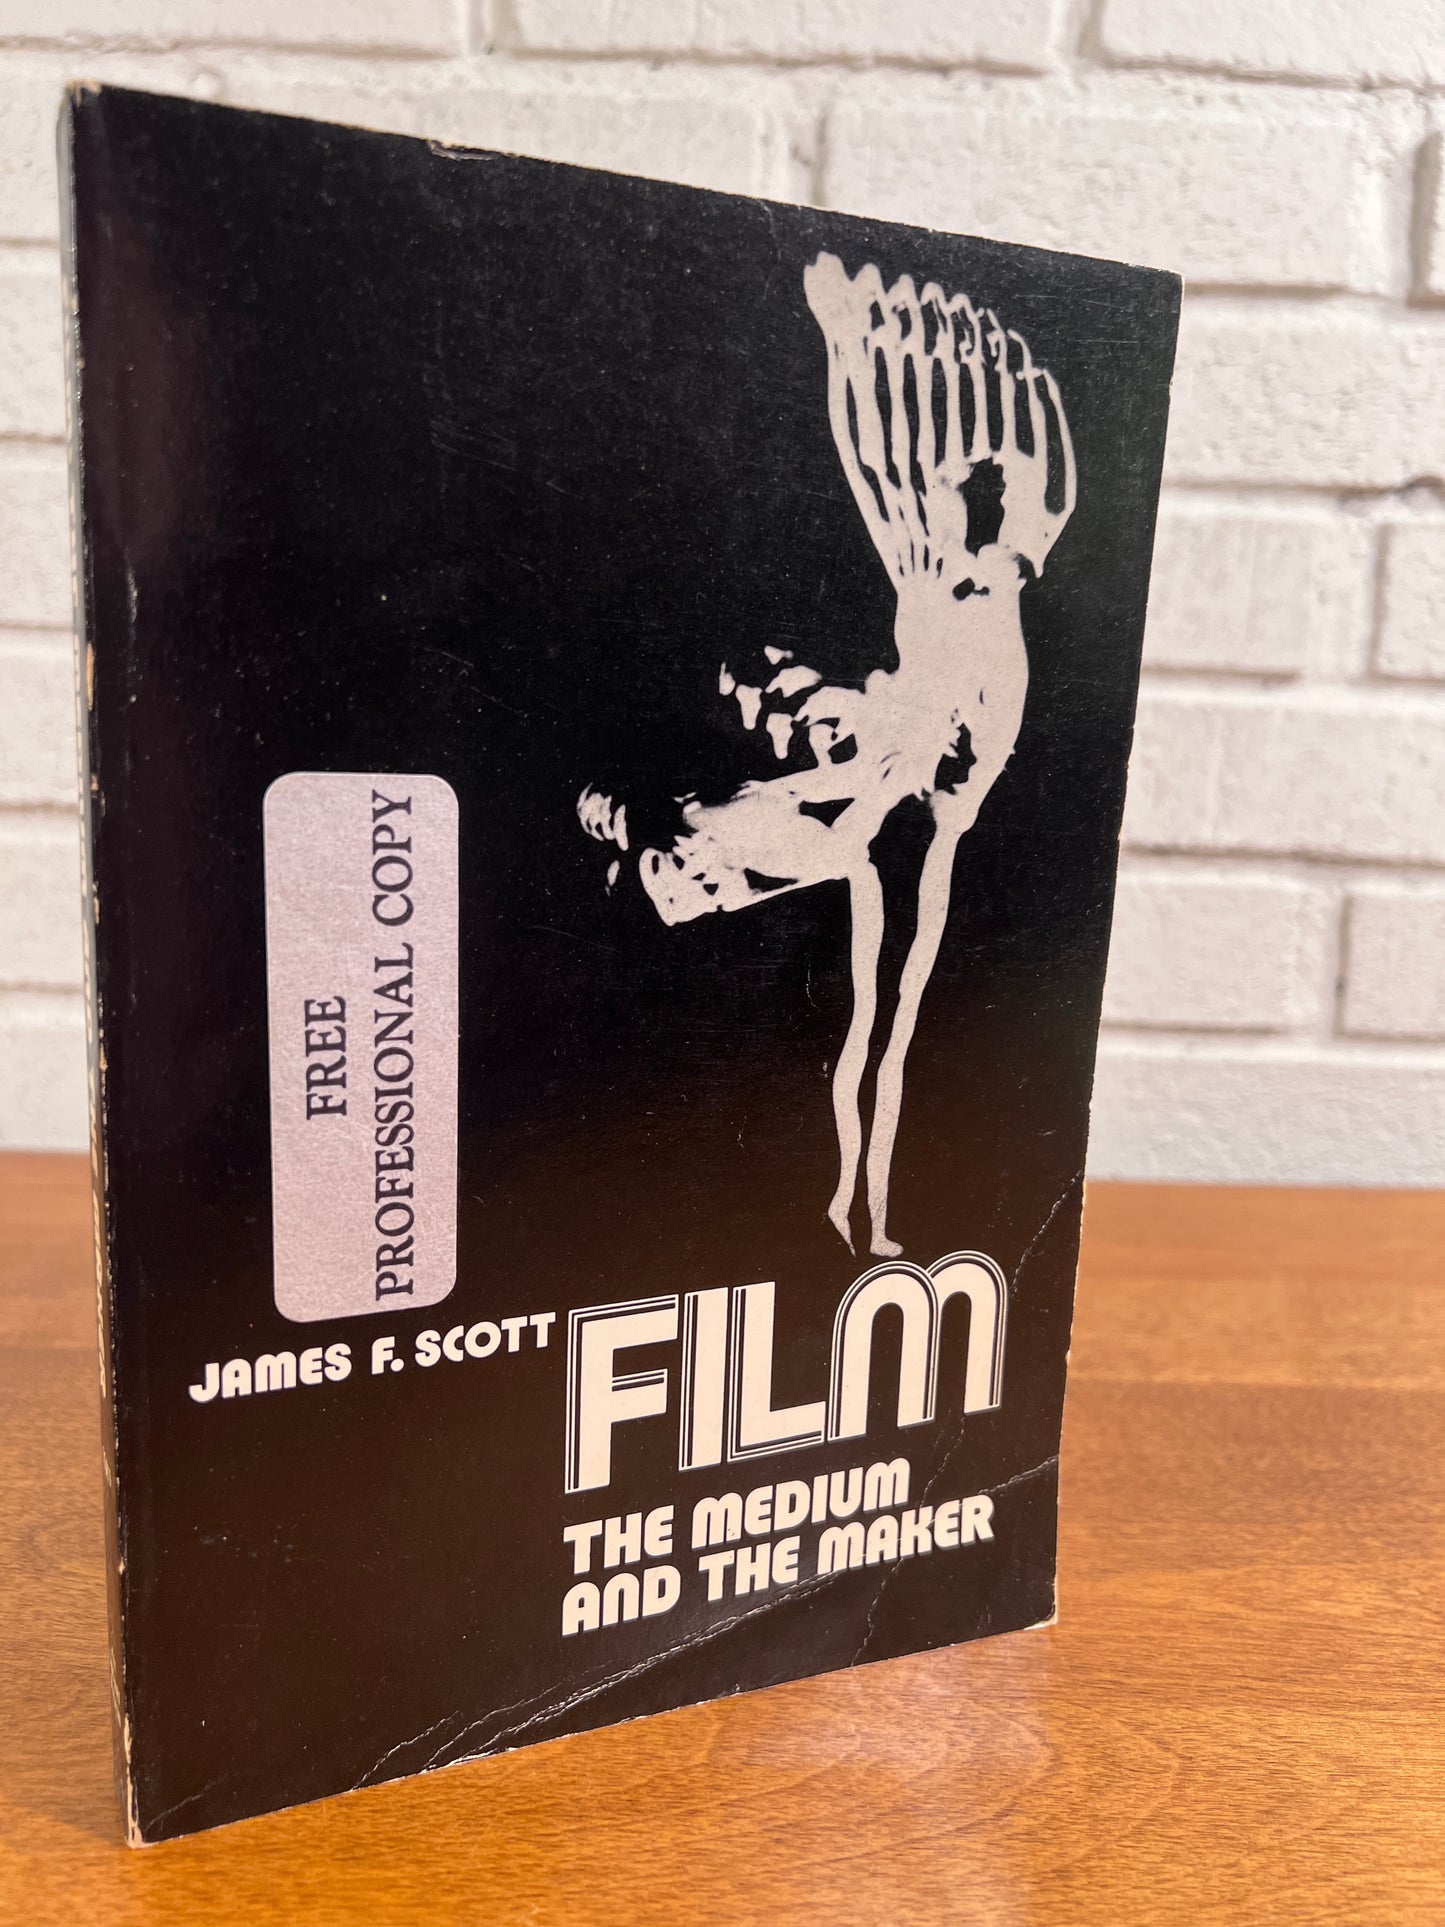 Film, The Medium and The Maker by James F.Scott